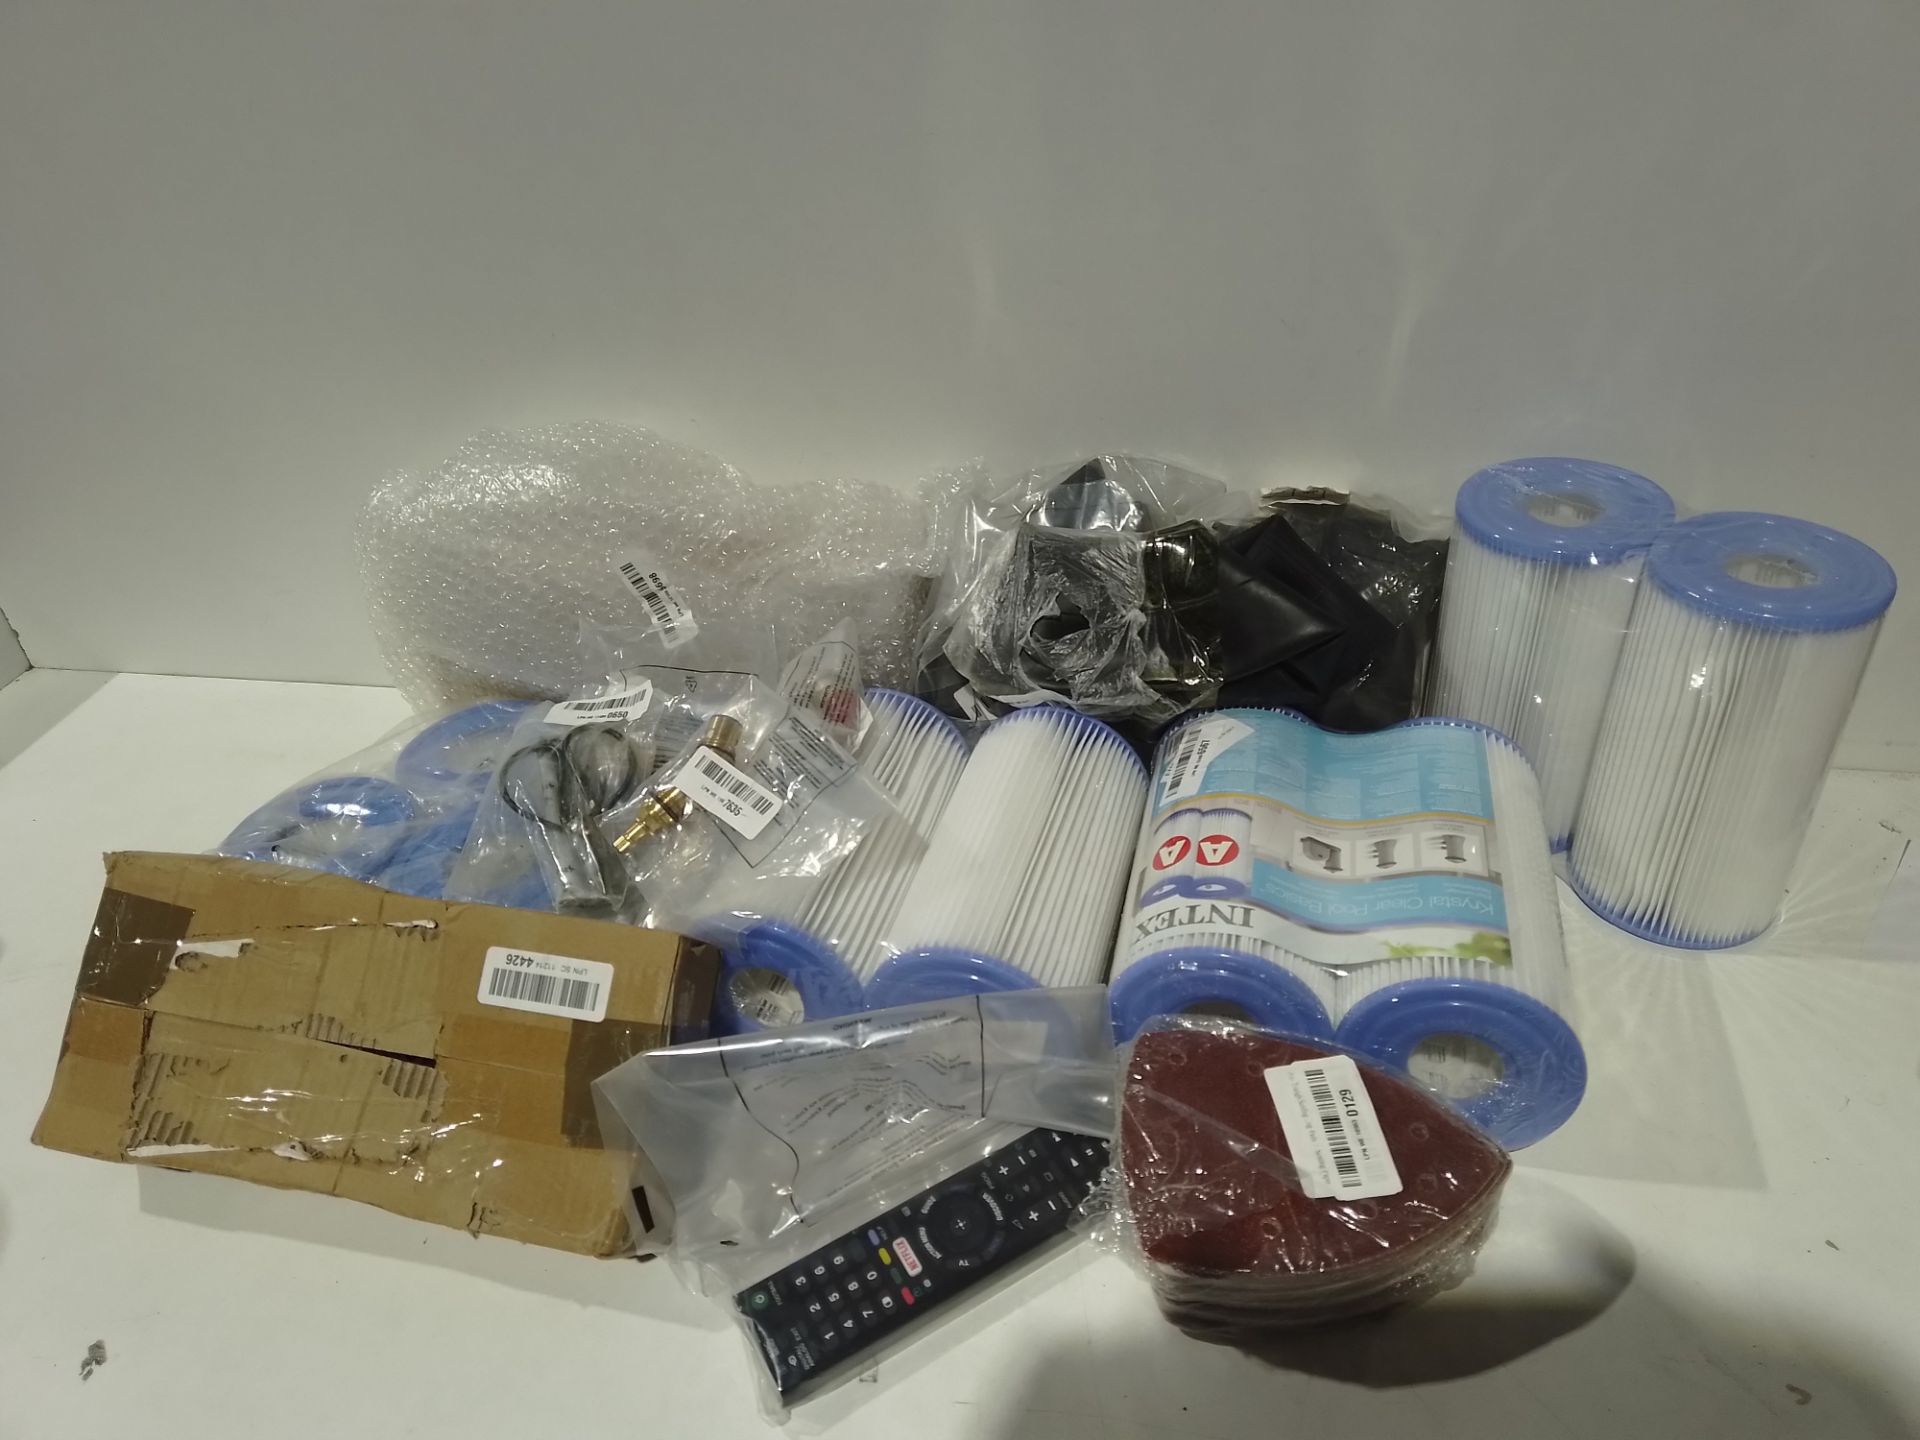 RRP £151.82 Total, Lot consisting of 16 items - See description. - Image 2 of 9